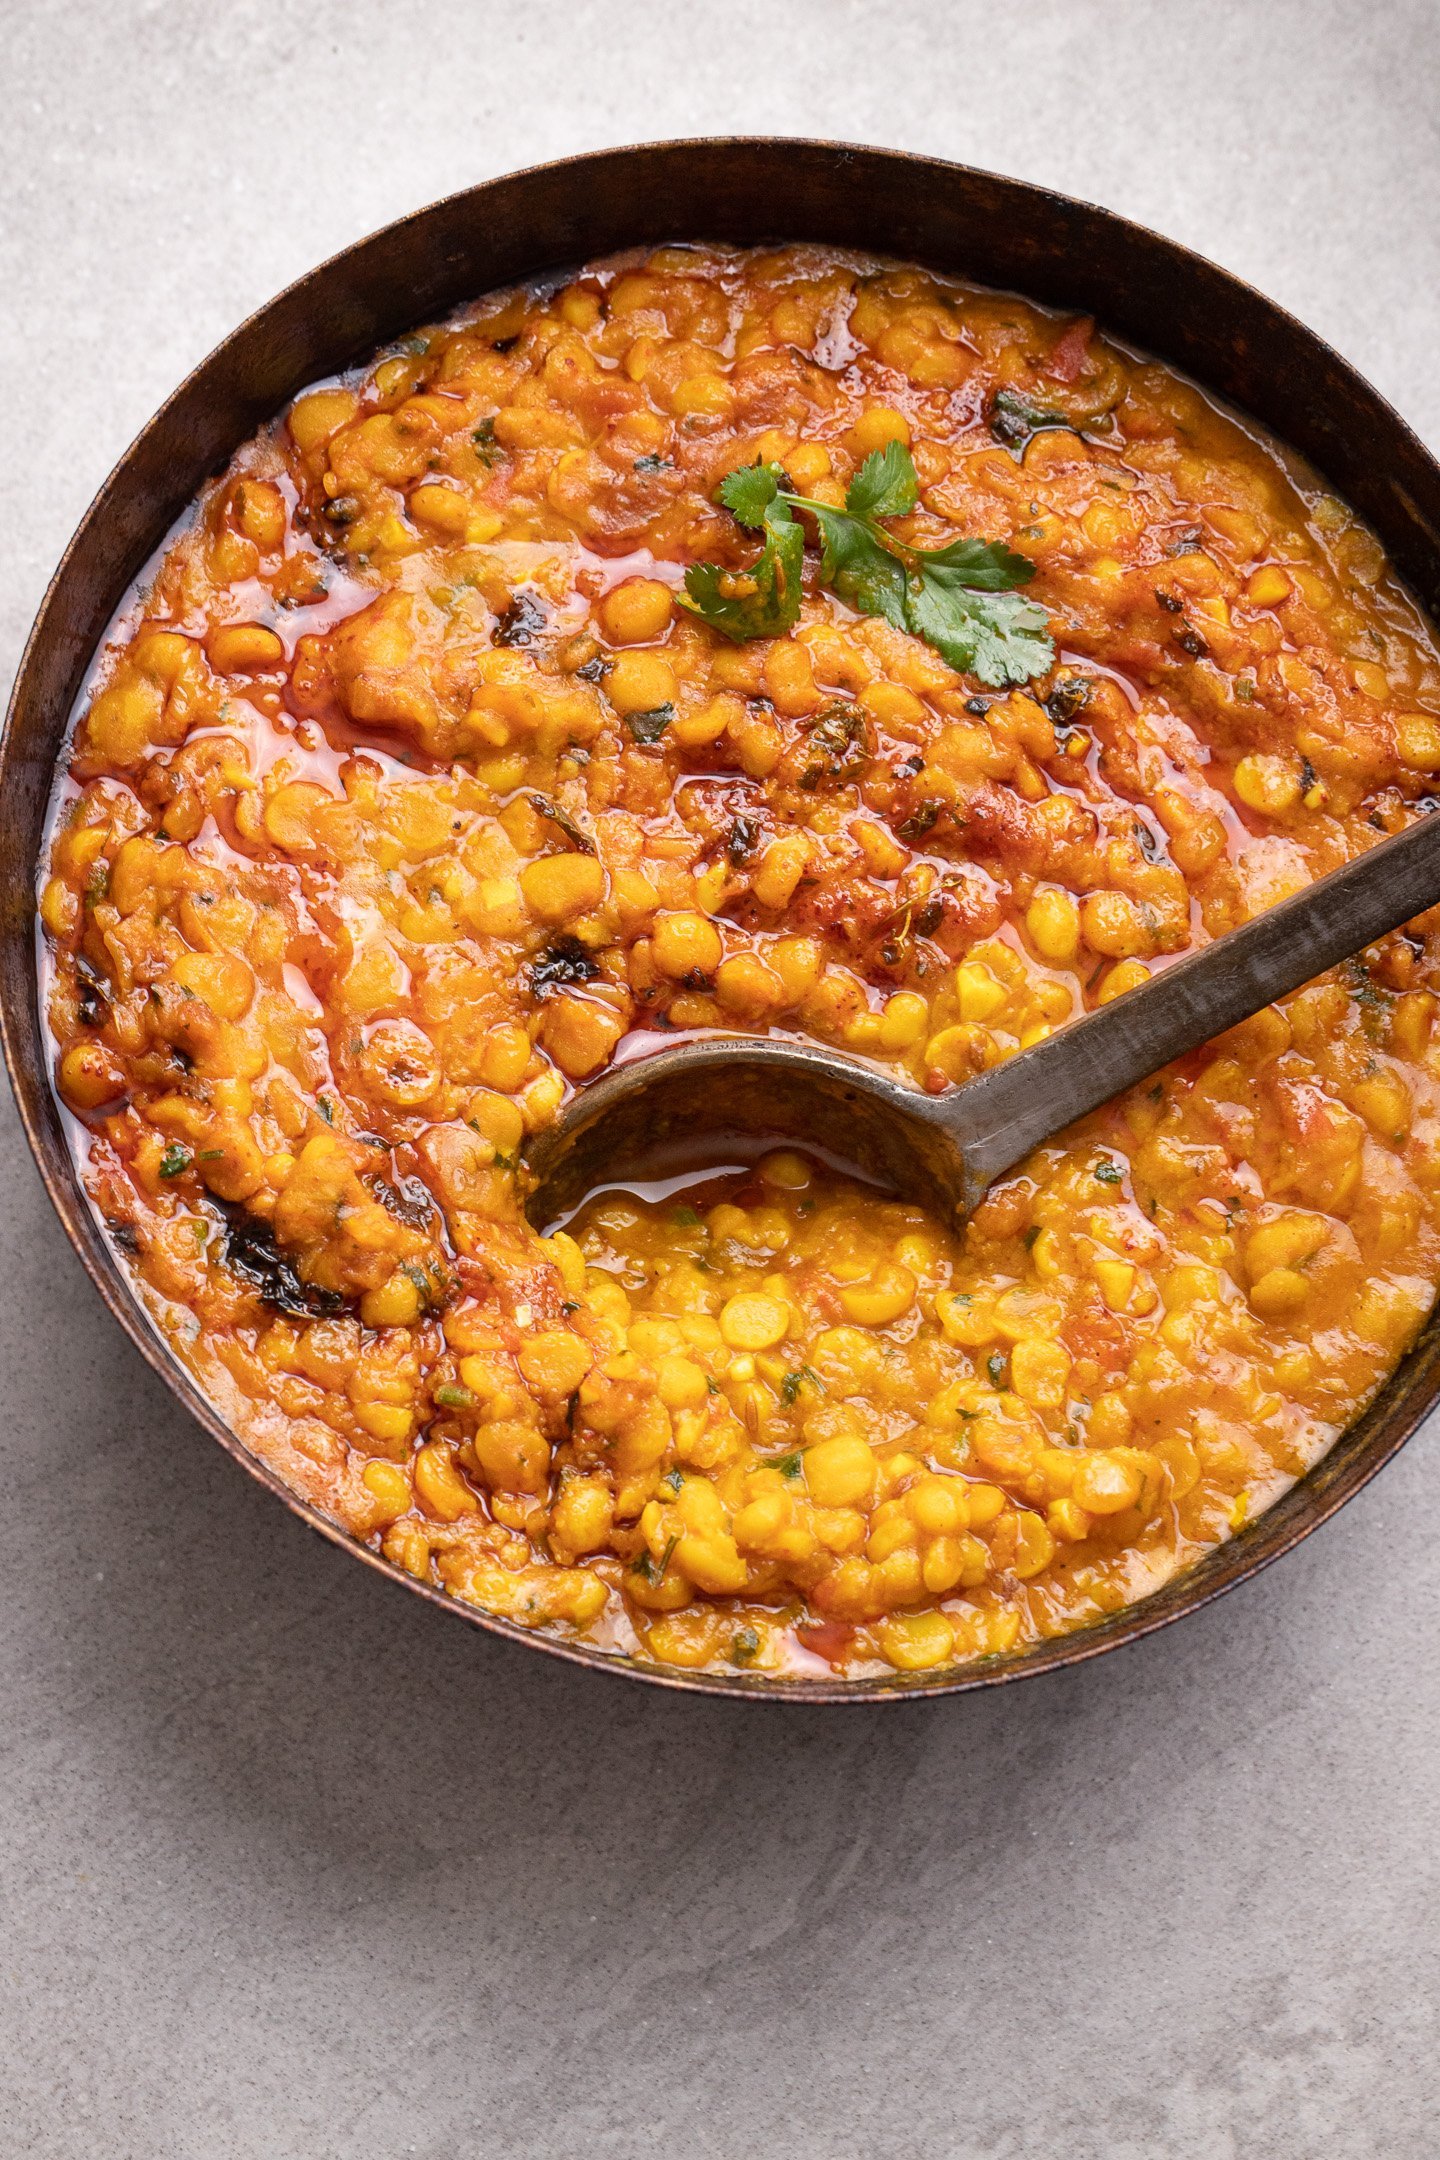 Chana dal in a bowl ready to be served